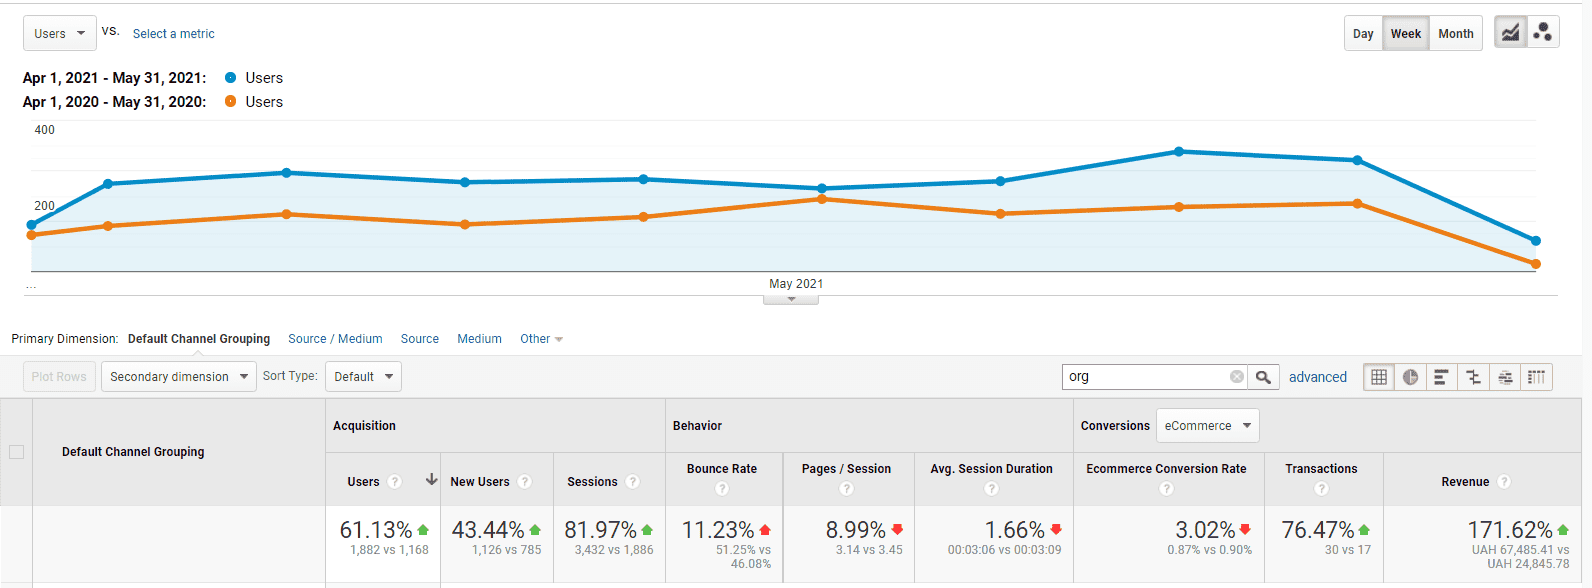 turb2en 254% traffic growth in 11 months or how SEO helps sell fans